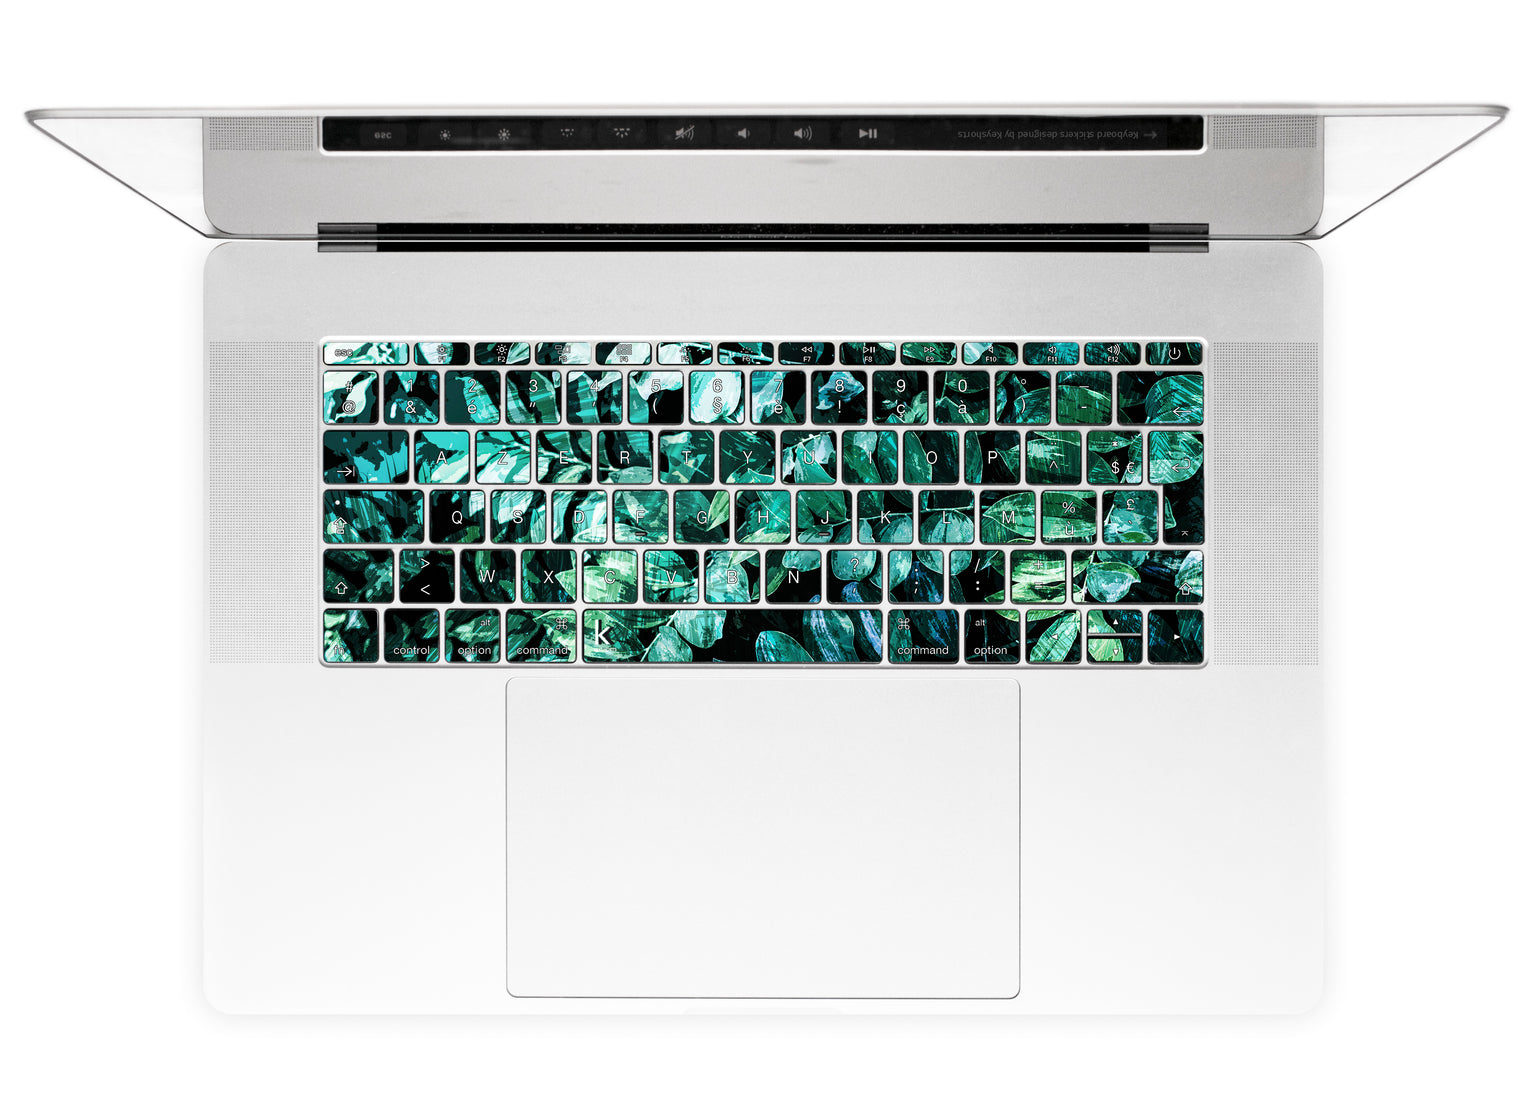 Mineral Leaves MacBook Keyboard Stickers alternate French